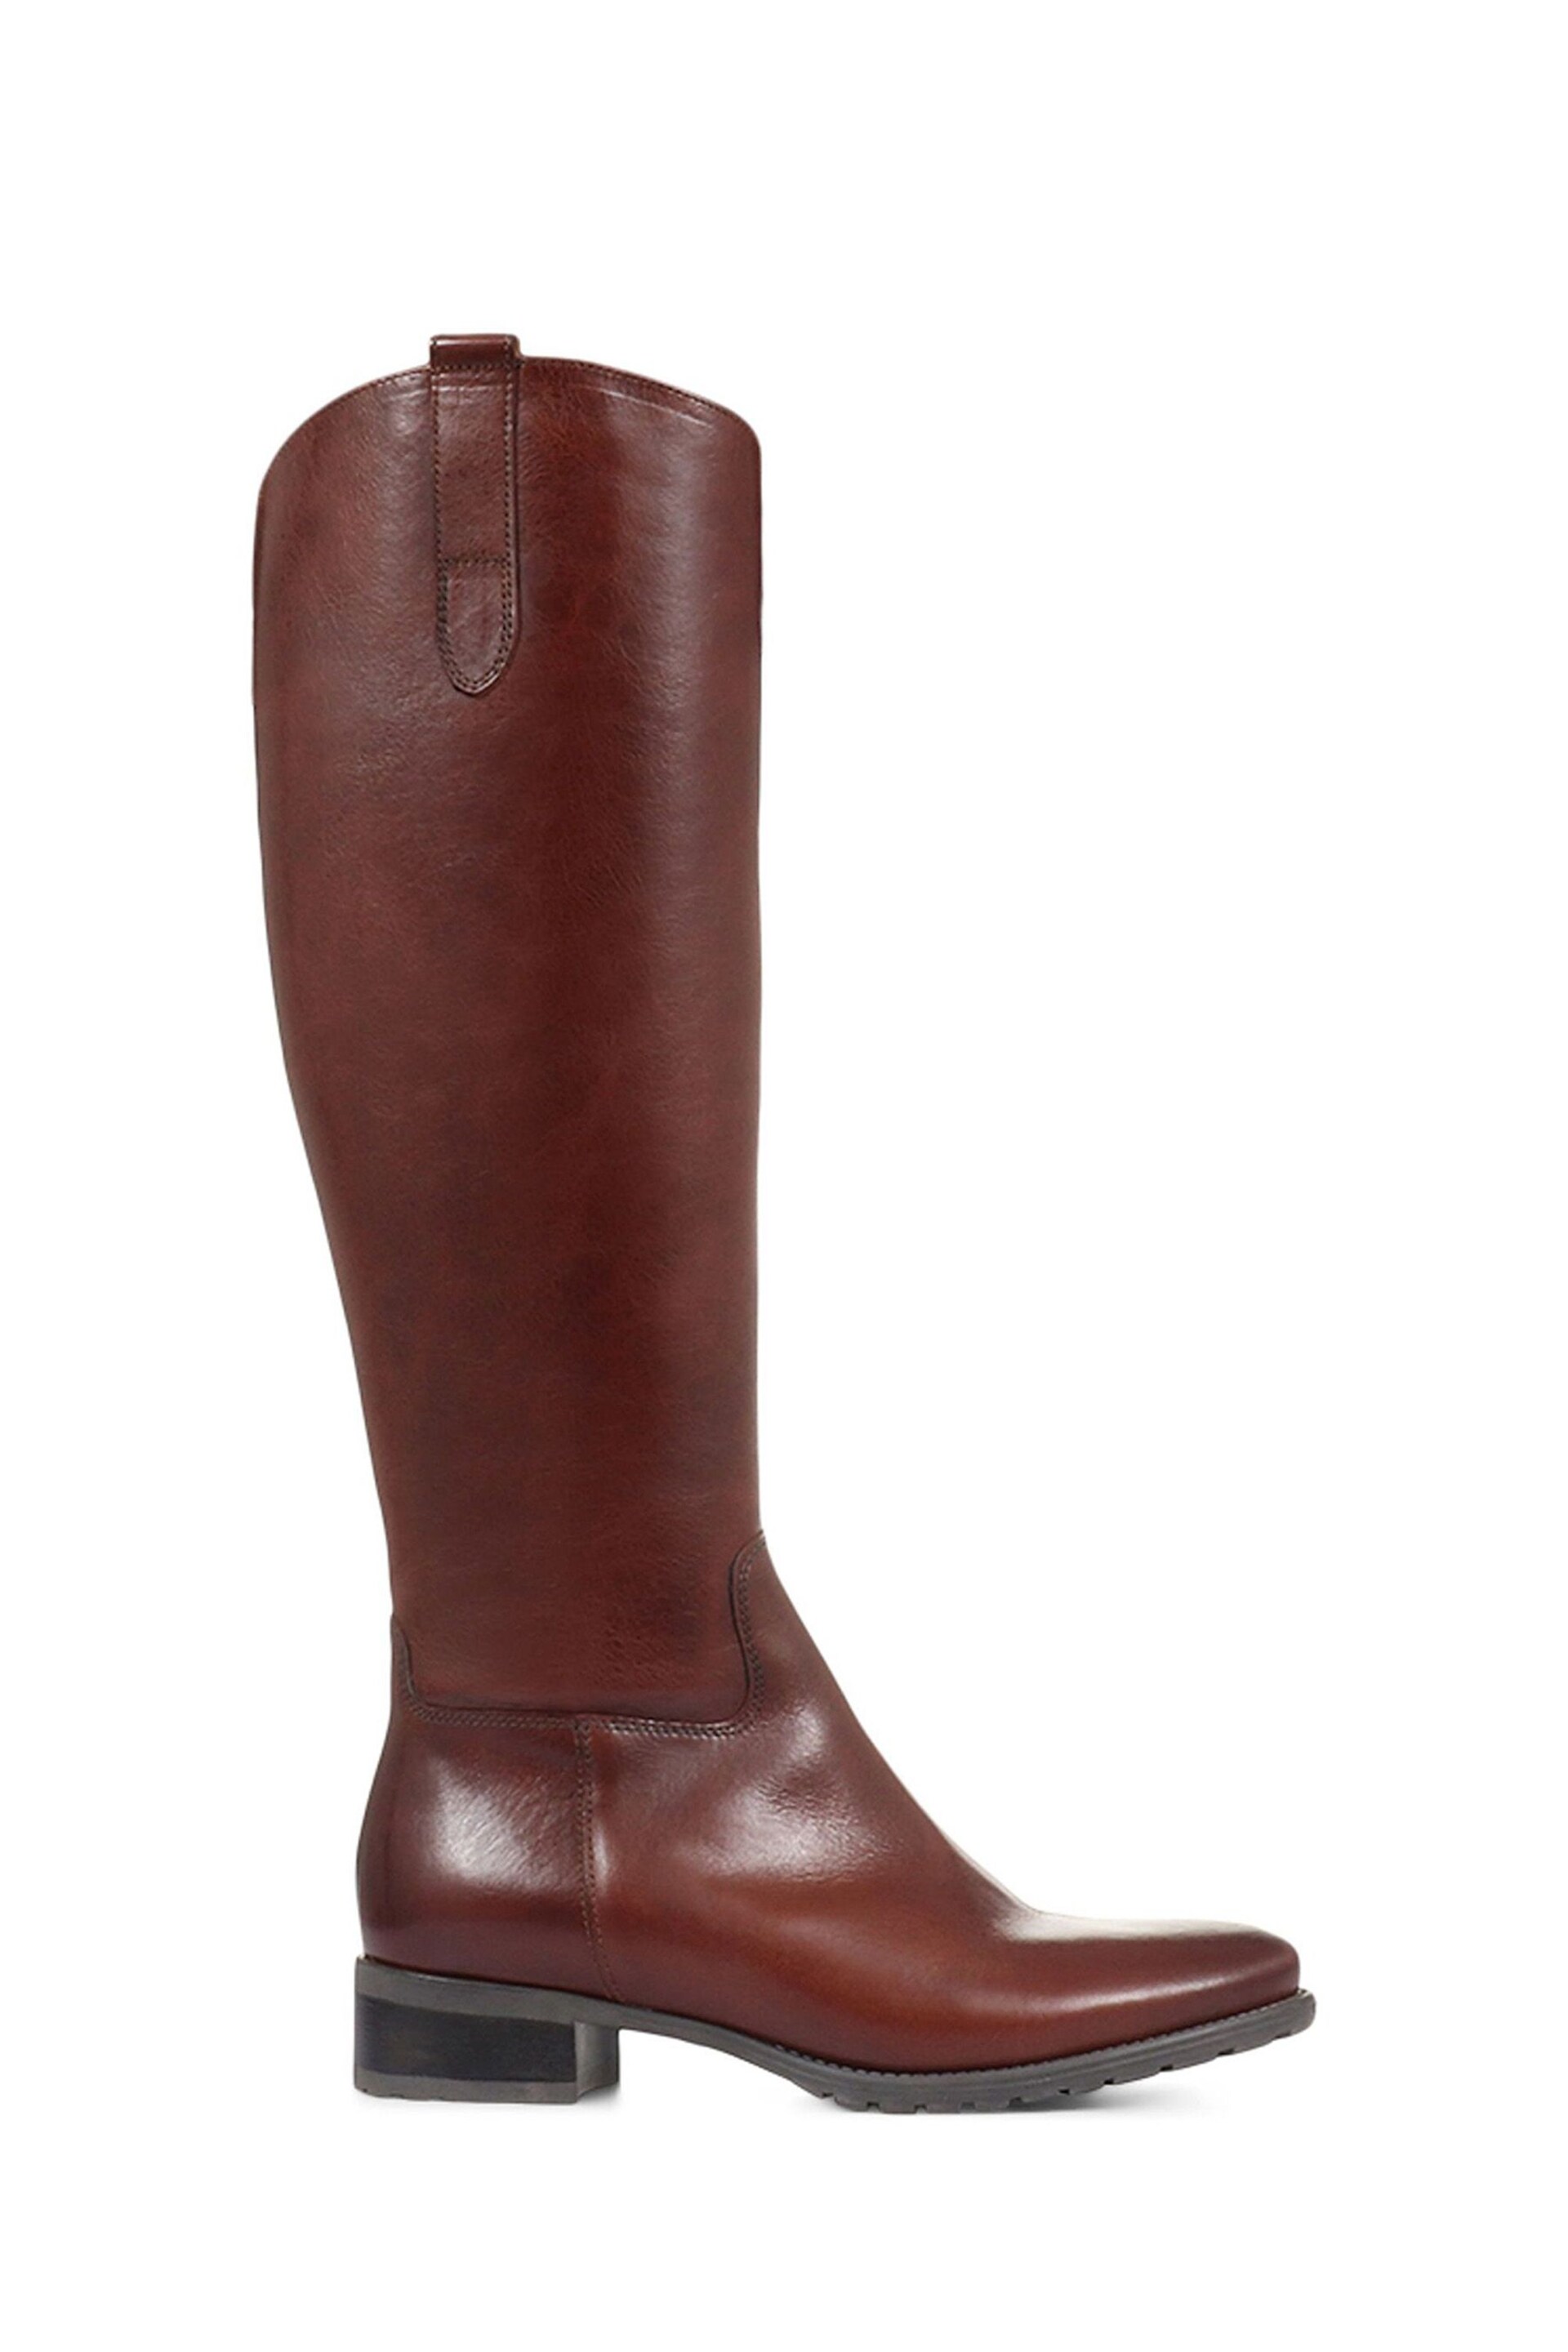 Jones Bootmaker Womens Cinzia Brown Leather Riding Boots - Image 1 of 5